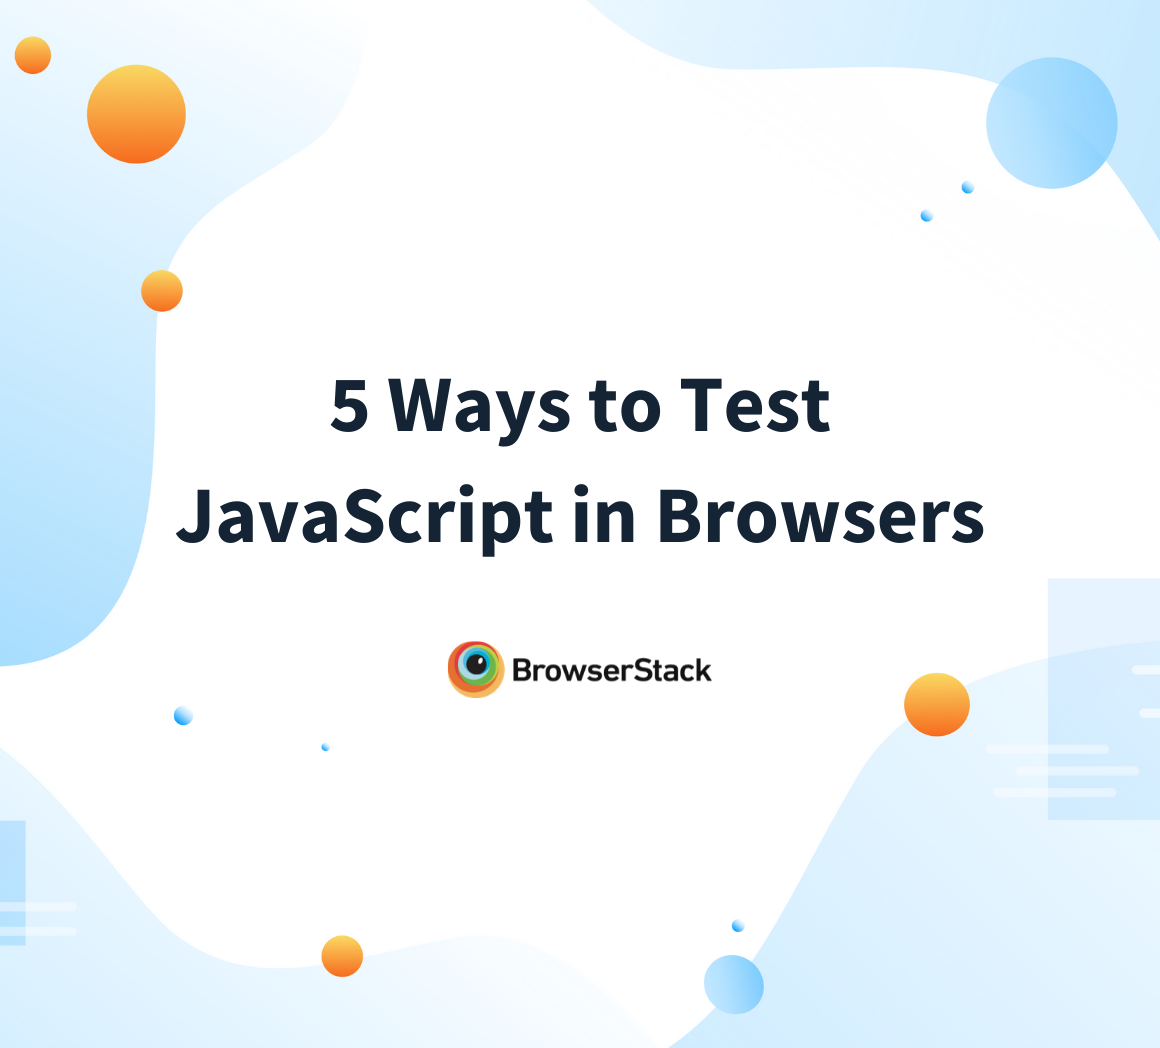 5 Ways to Test Javascript in Browsers